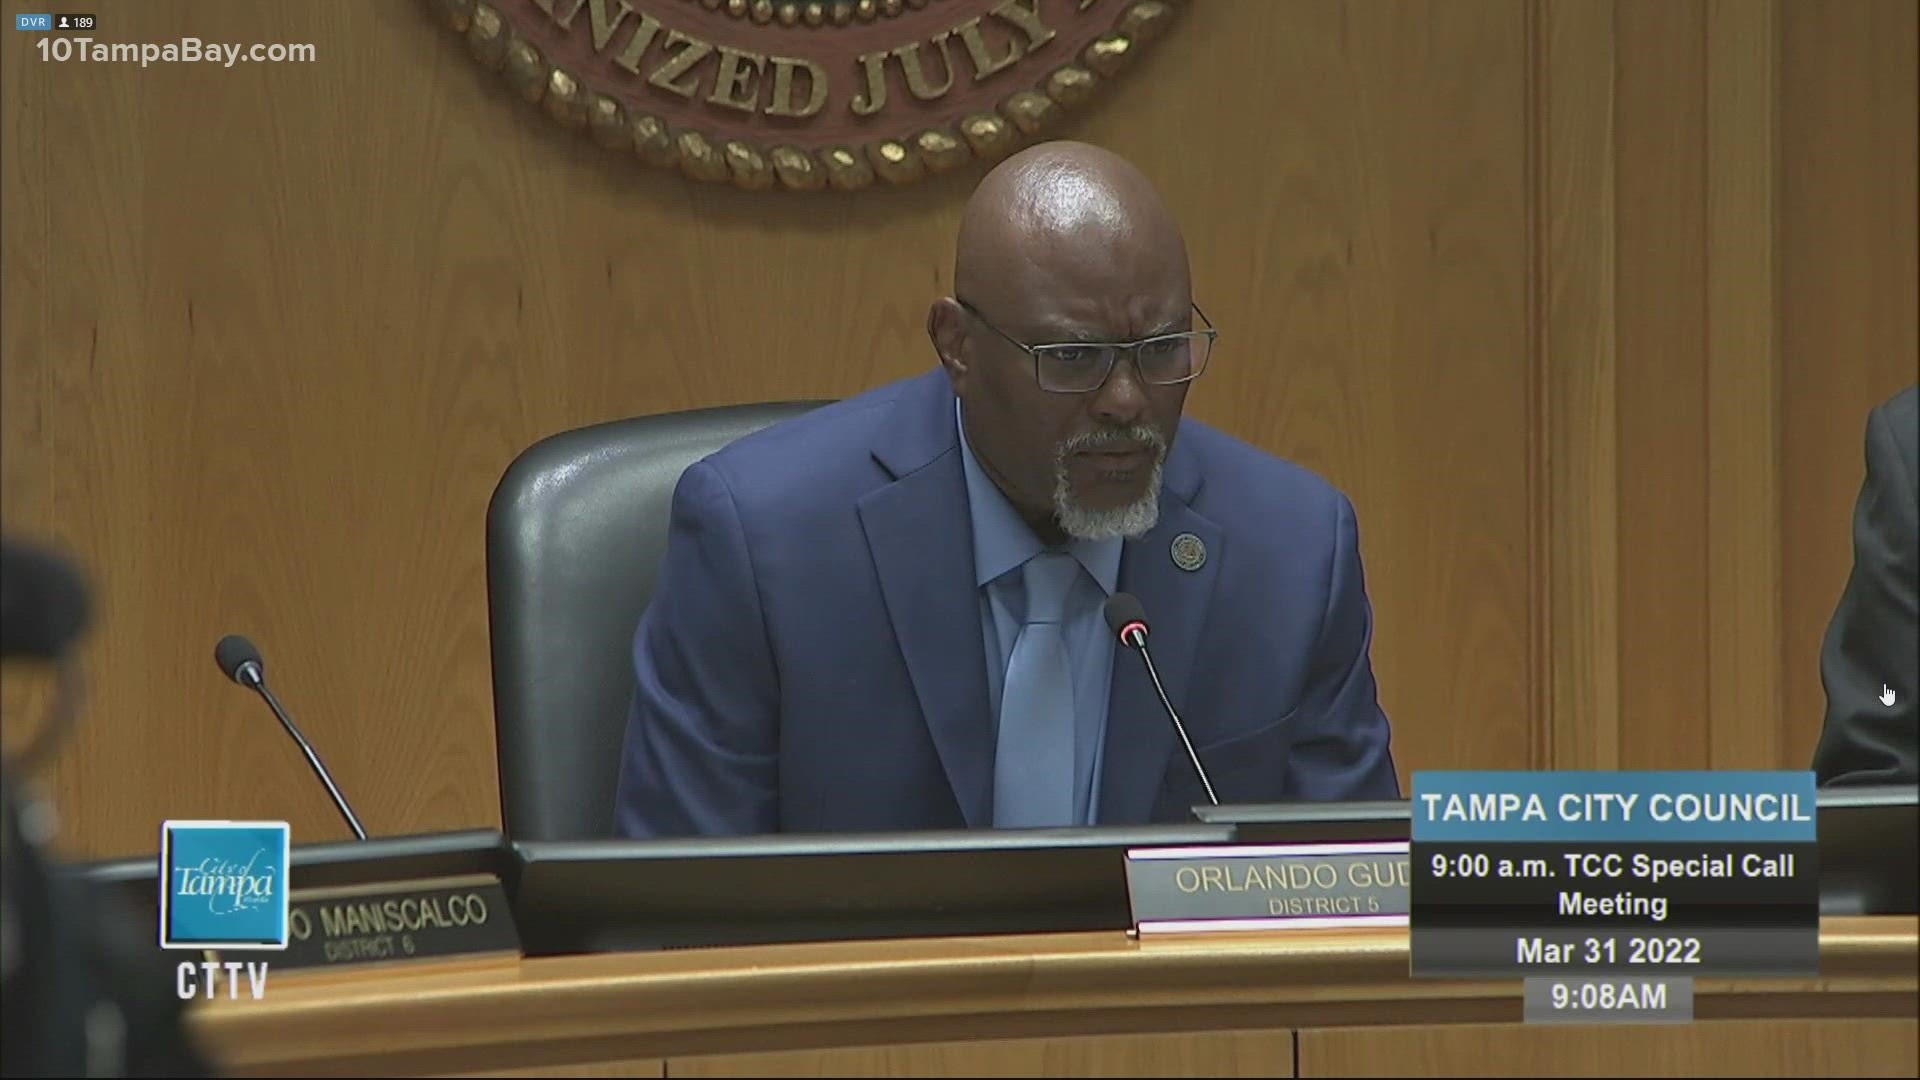 The city of Tampa hired an independent law firm to investigate 19 allegations made against the chairman.